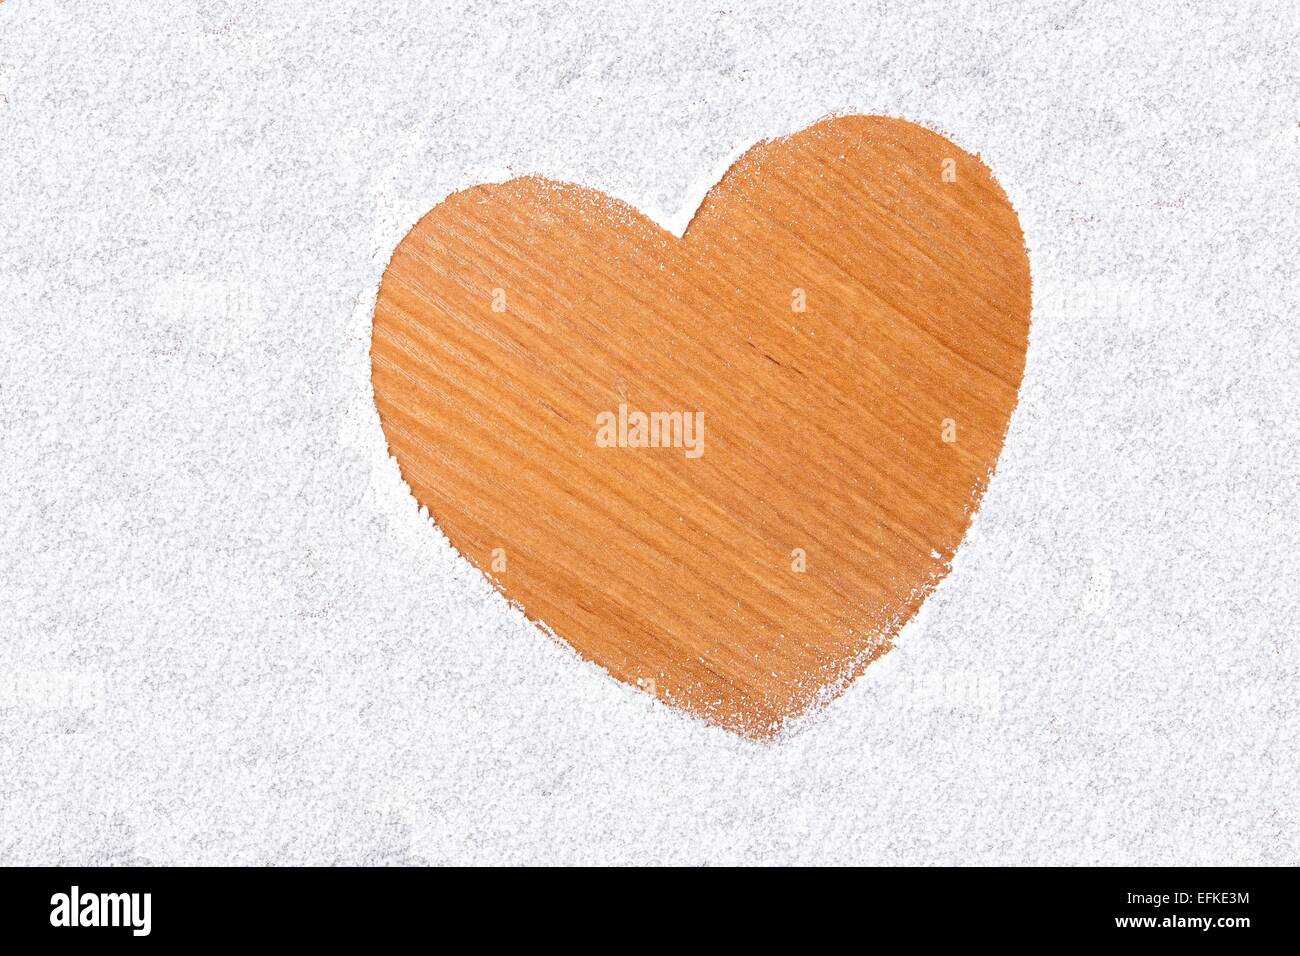 Heart in snow on a wooden background. Stock Photo